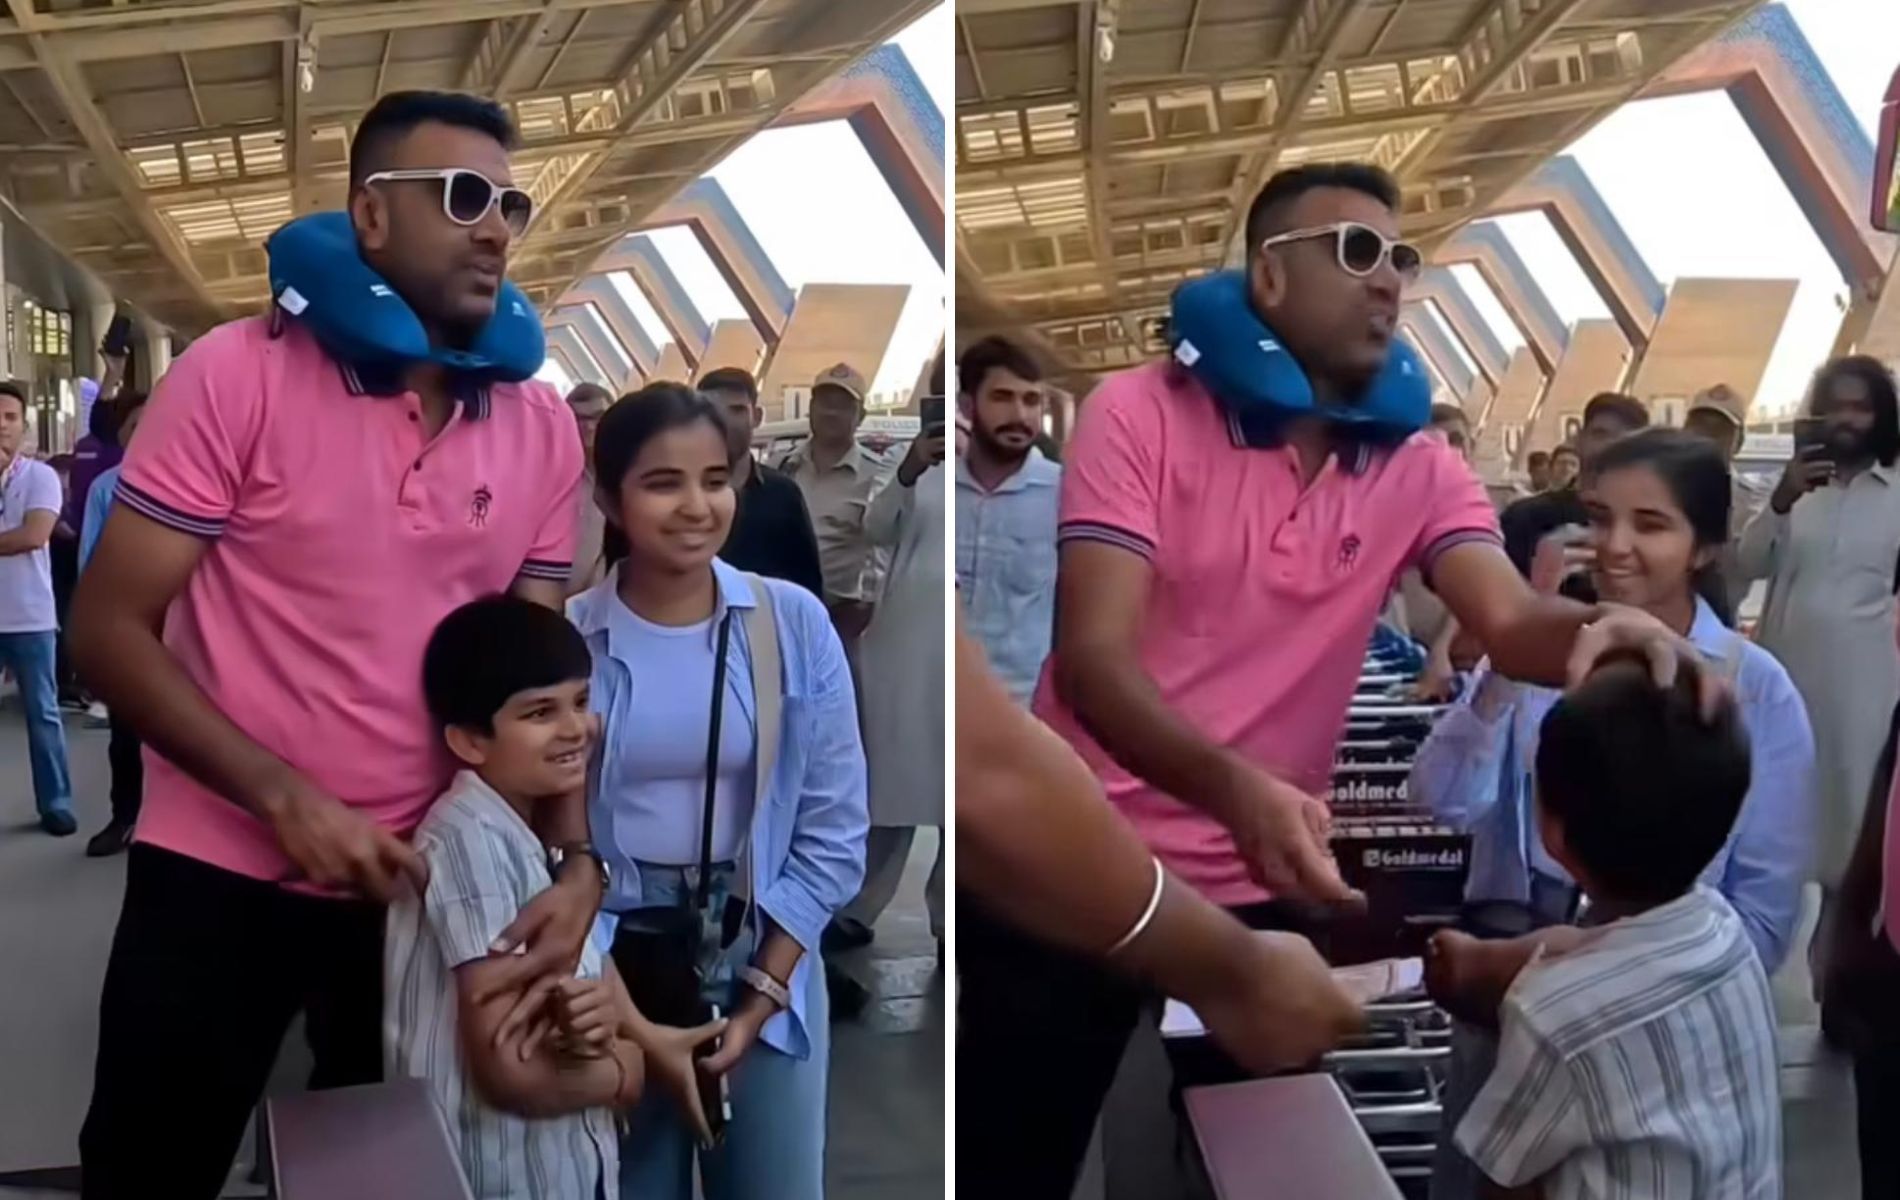 Ravichandran Ashwin posed for pictures with fans at the airport.